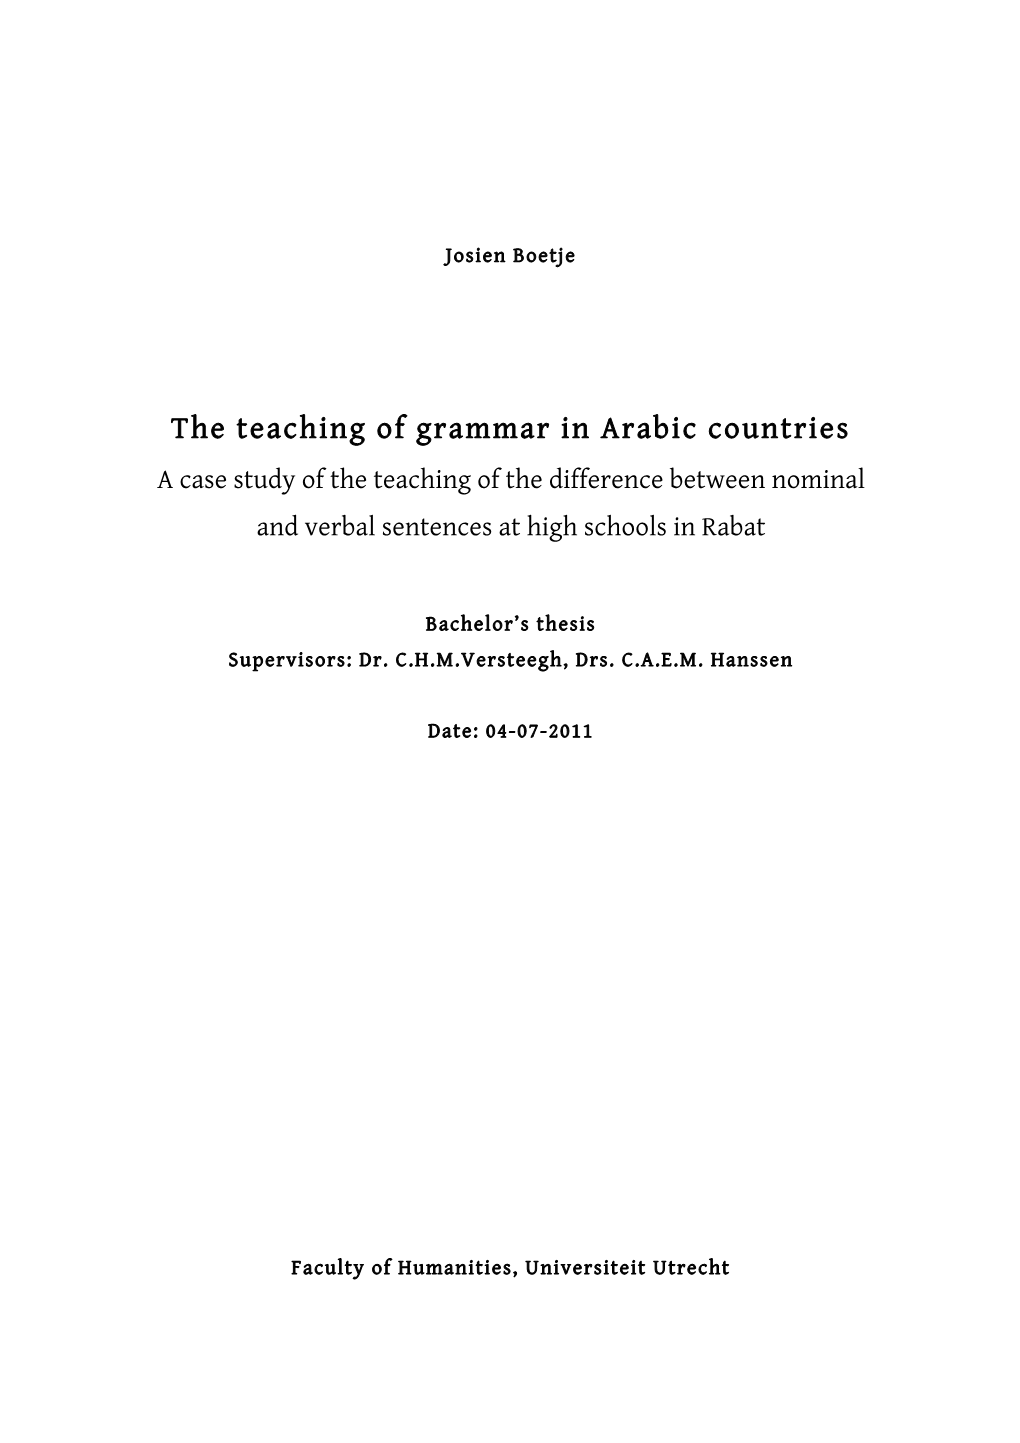 The Teaching of Grammar in Arabic Countries a Case Study of the Teaching of the Difference Between Nominal and Verbal Sentences at High Schools in Rabat